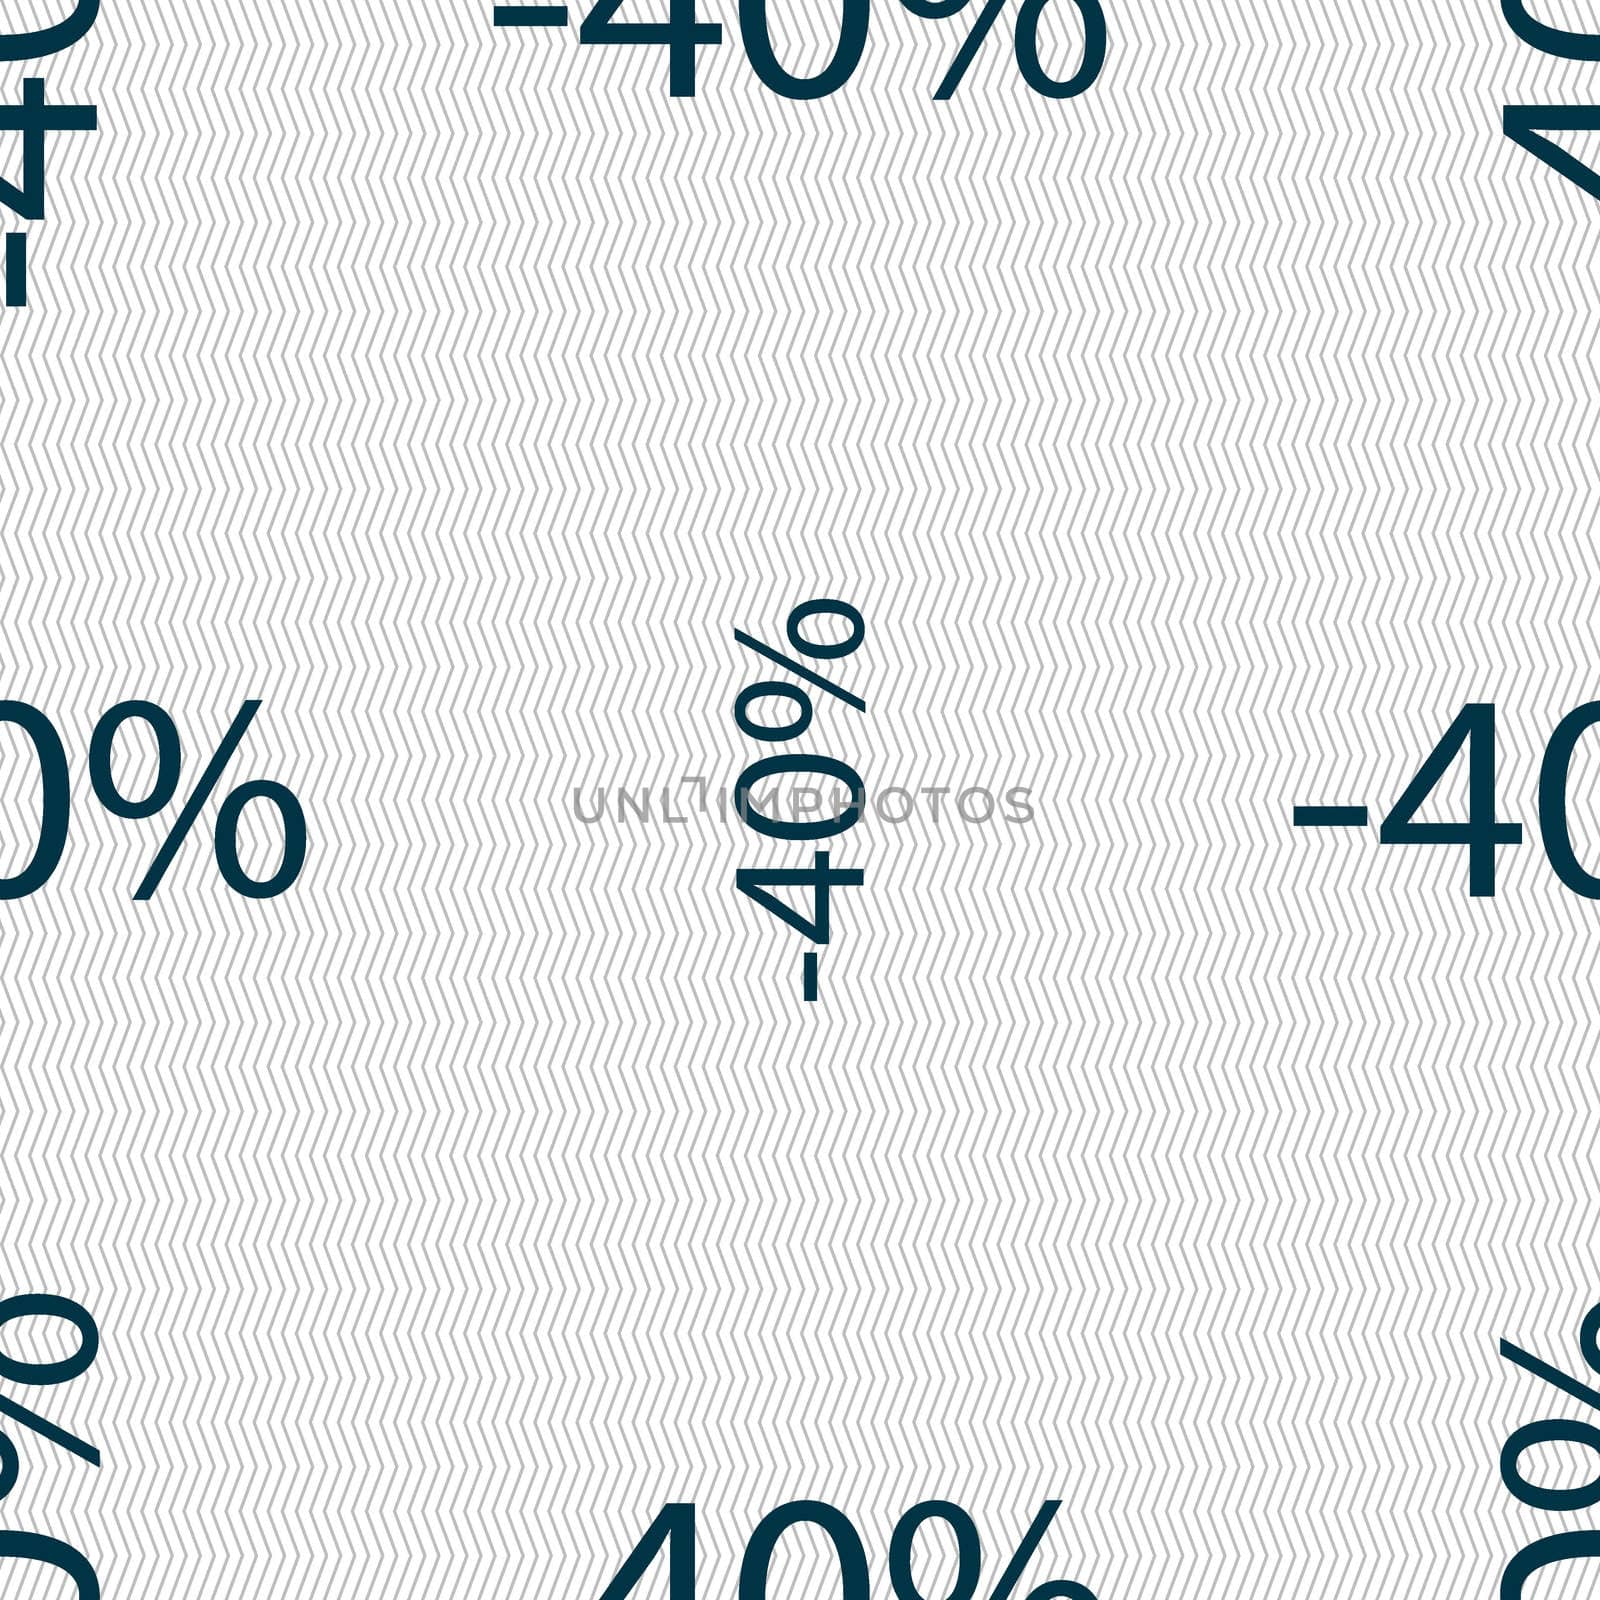 40 percent discount sign icon. Sale symbol. Special offer label. Seamless abstract background with geometric shapes. illustration